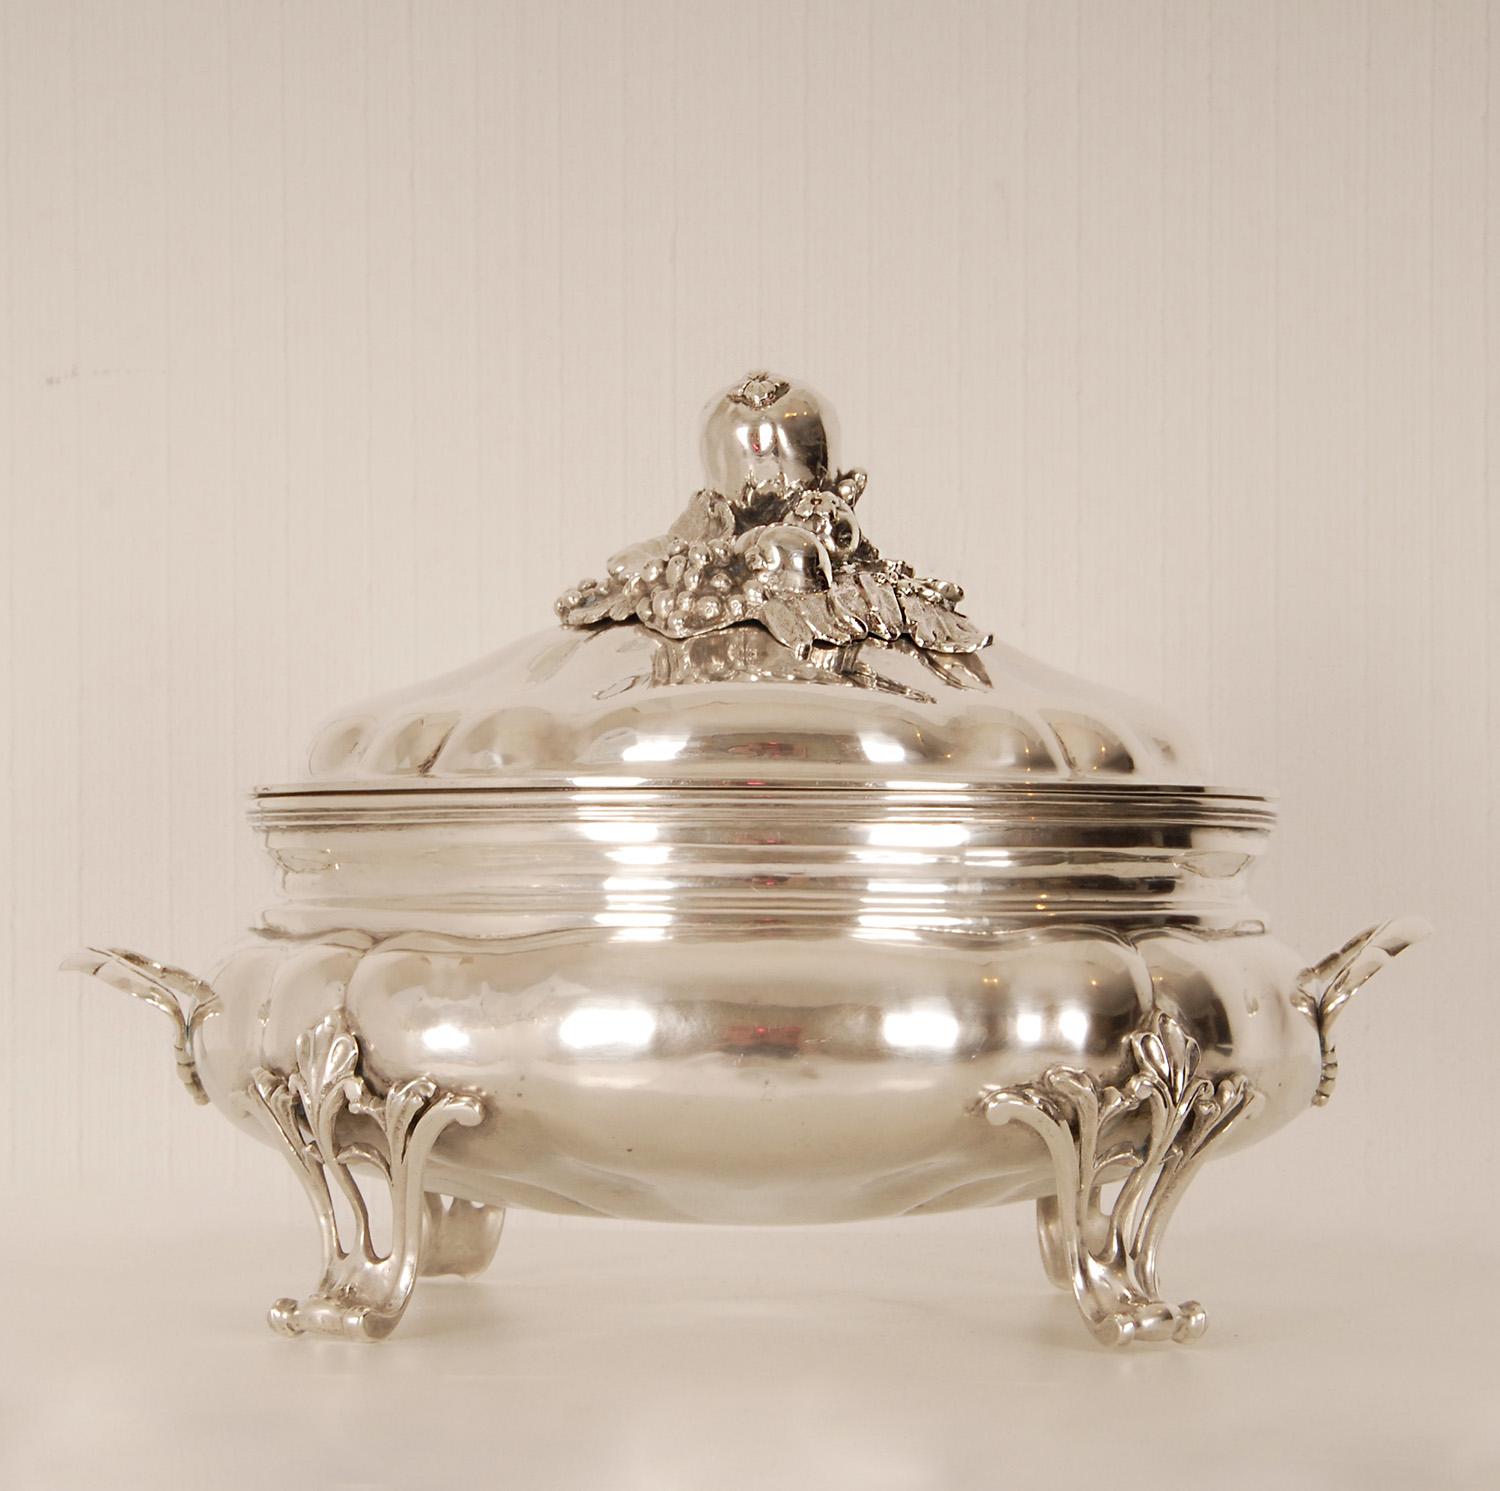 Cast 18th Century Sterling Silver Soup Tureen Hammered Italian Venice Rococo  For Sale